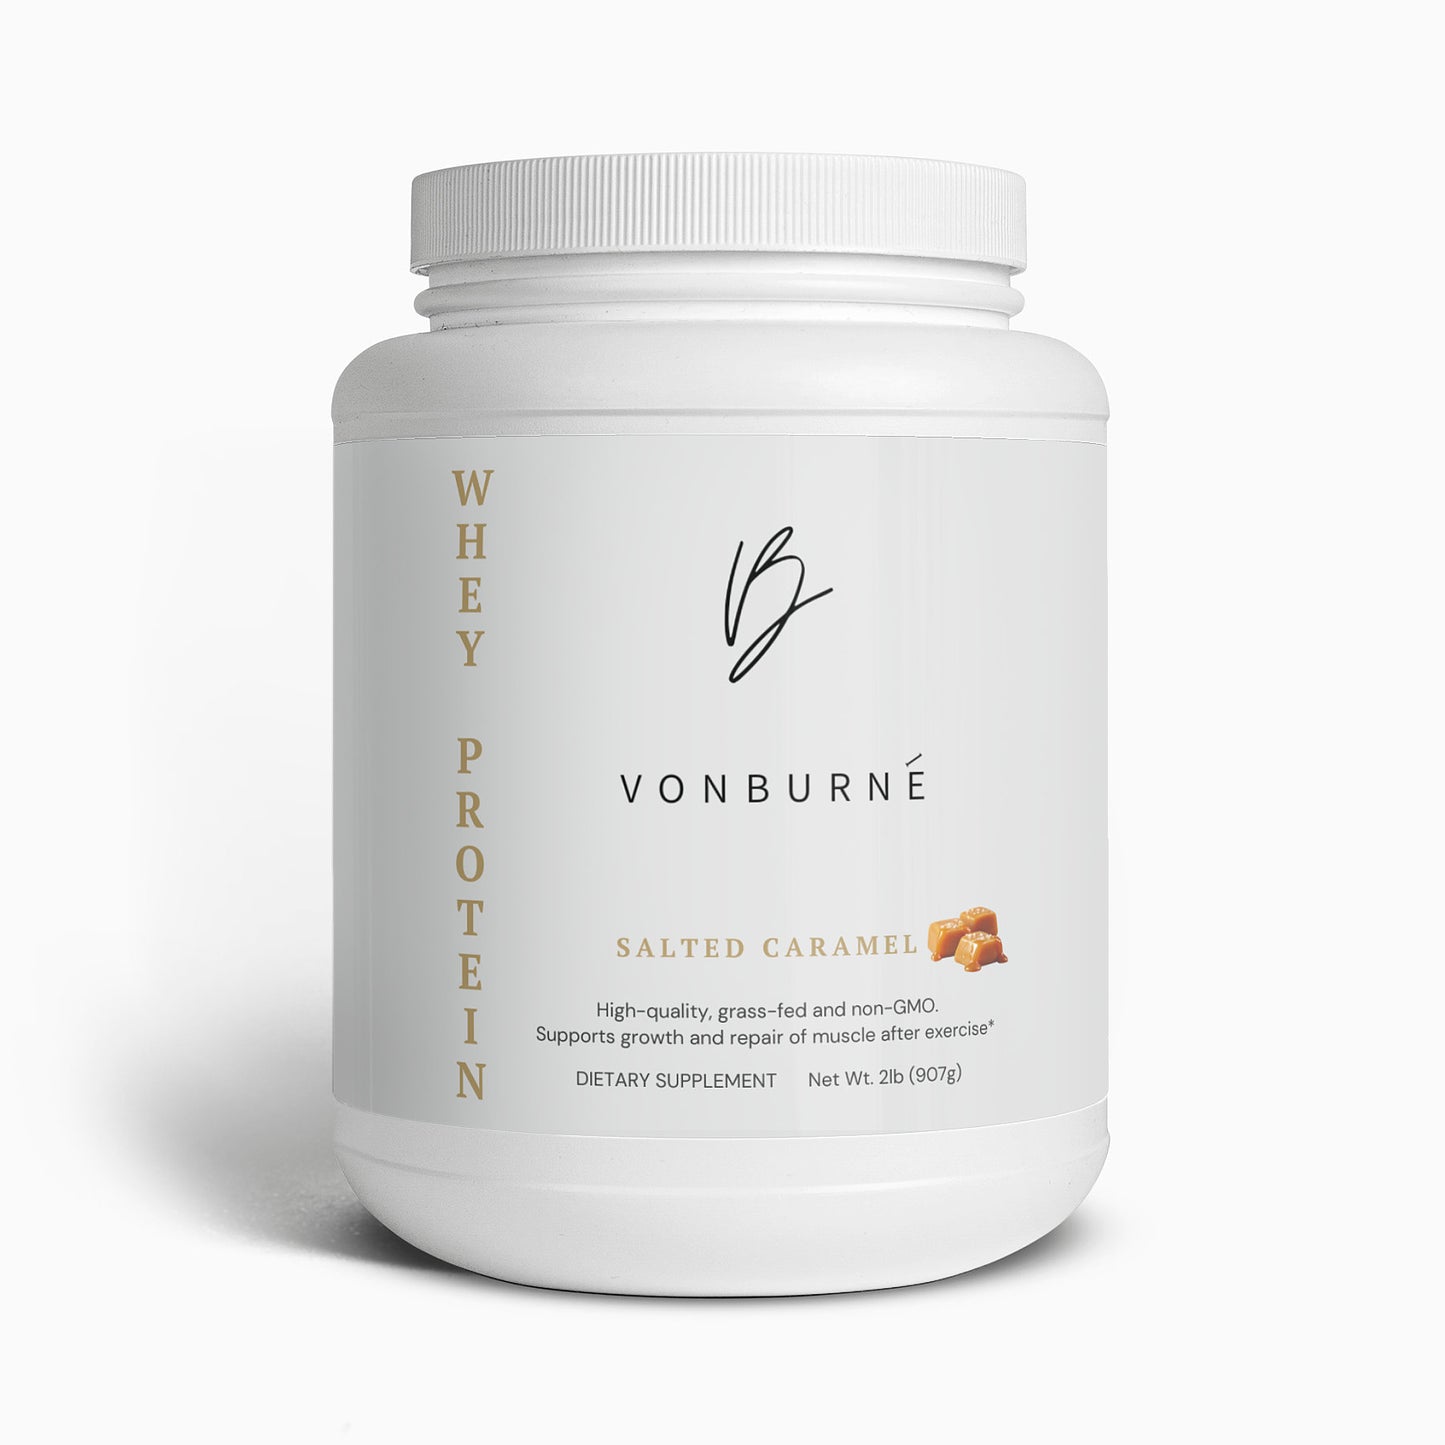 Whey Protein (Salted Caramel)